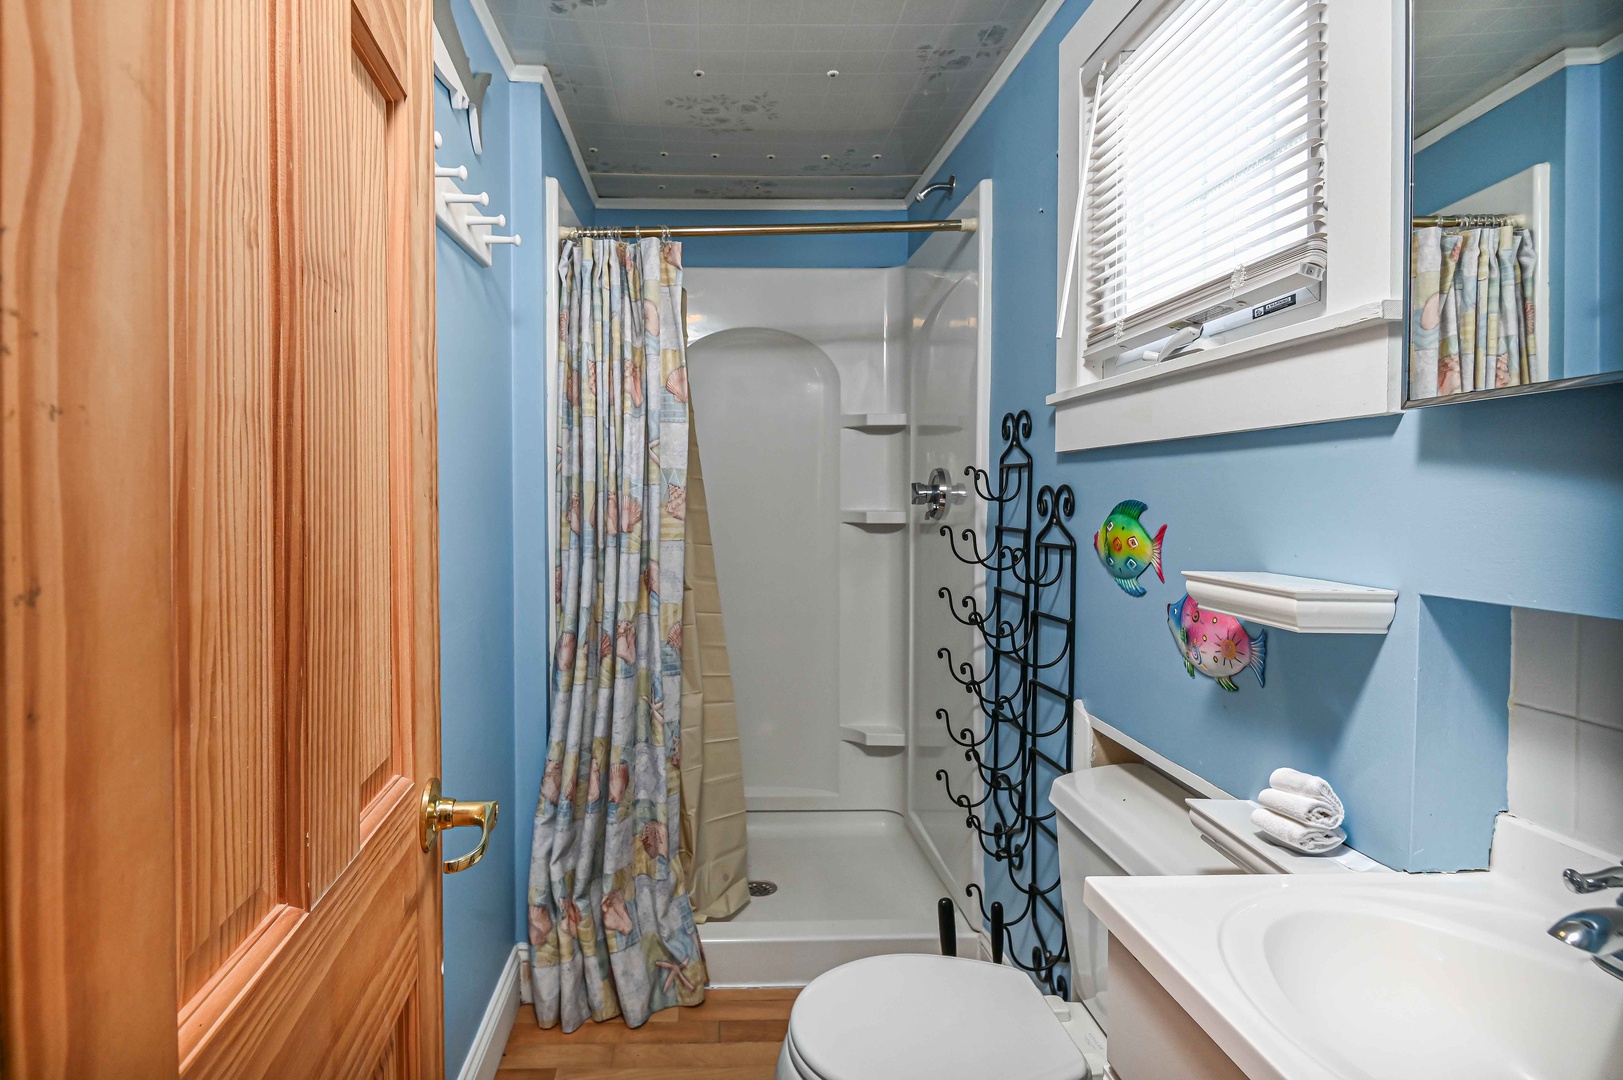 The full bathroom includes a single vanity & walk-in shower